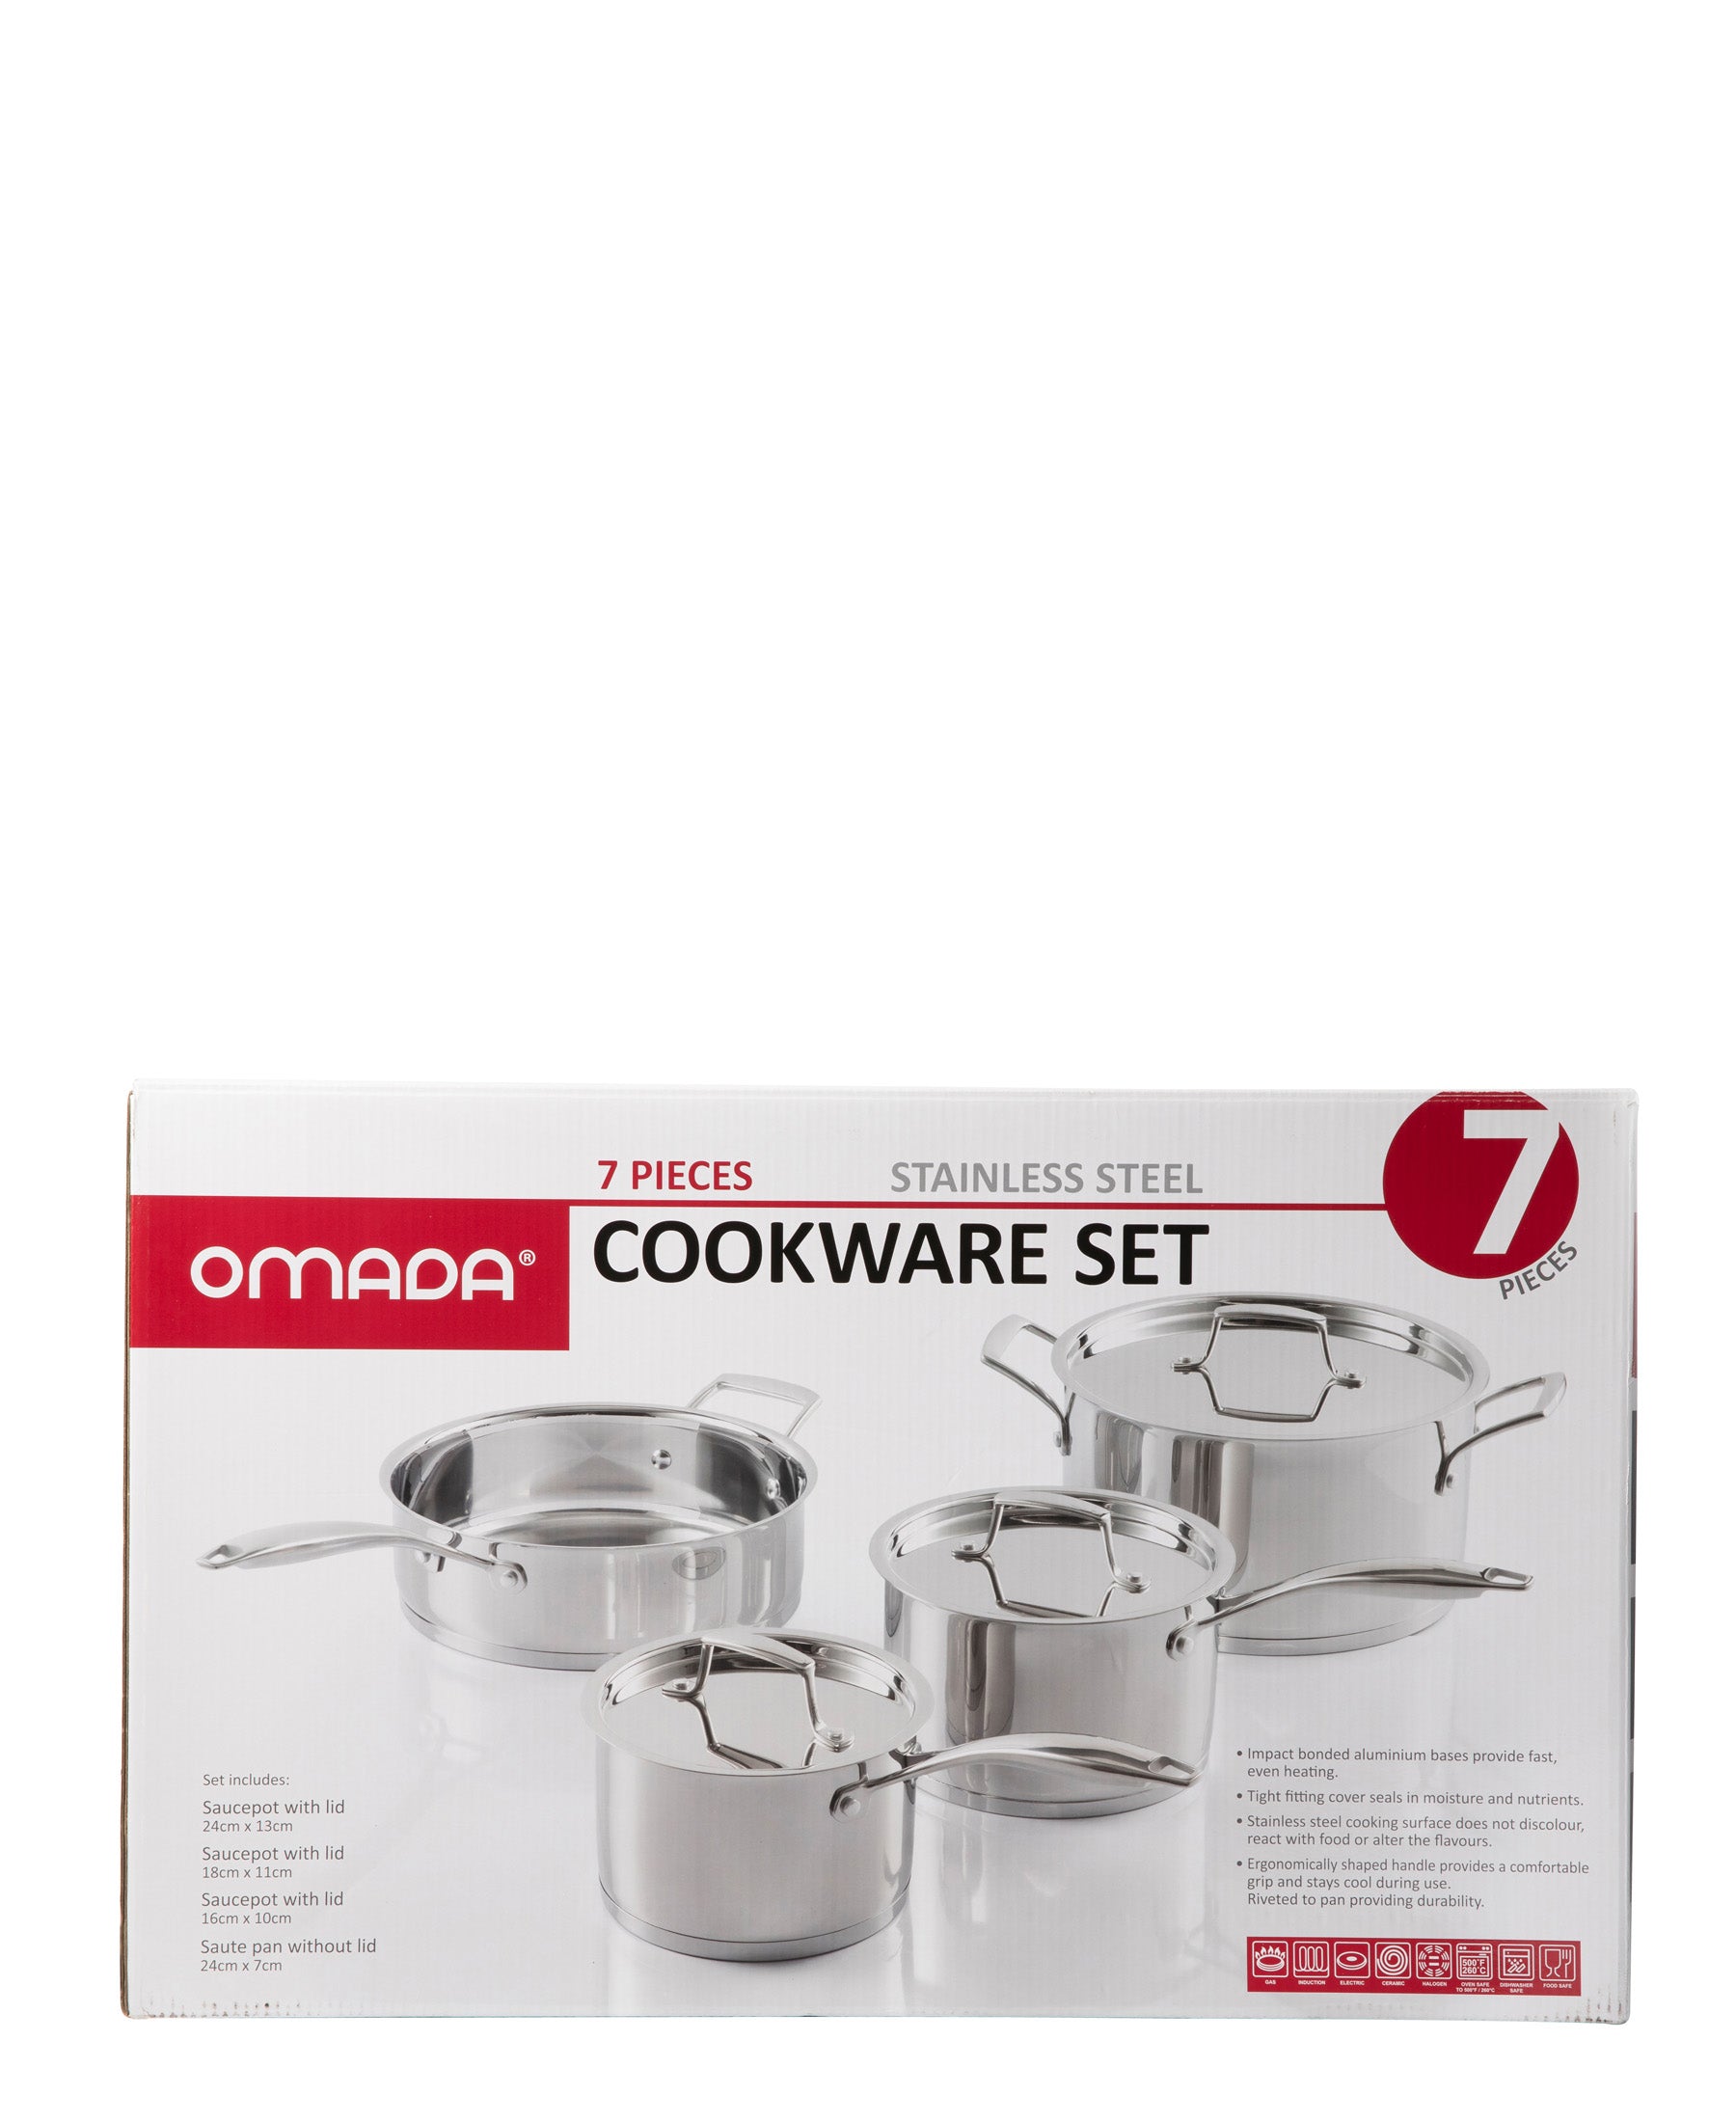 Omada 7 Piece Stainless Steel Cookware Set - Silver